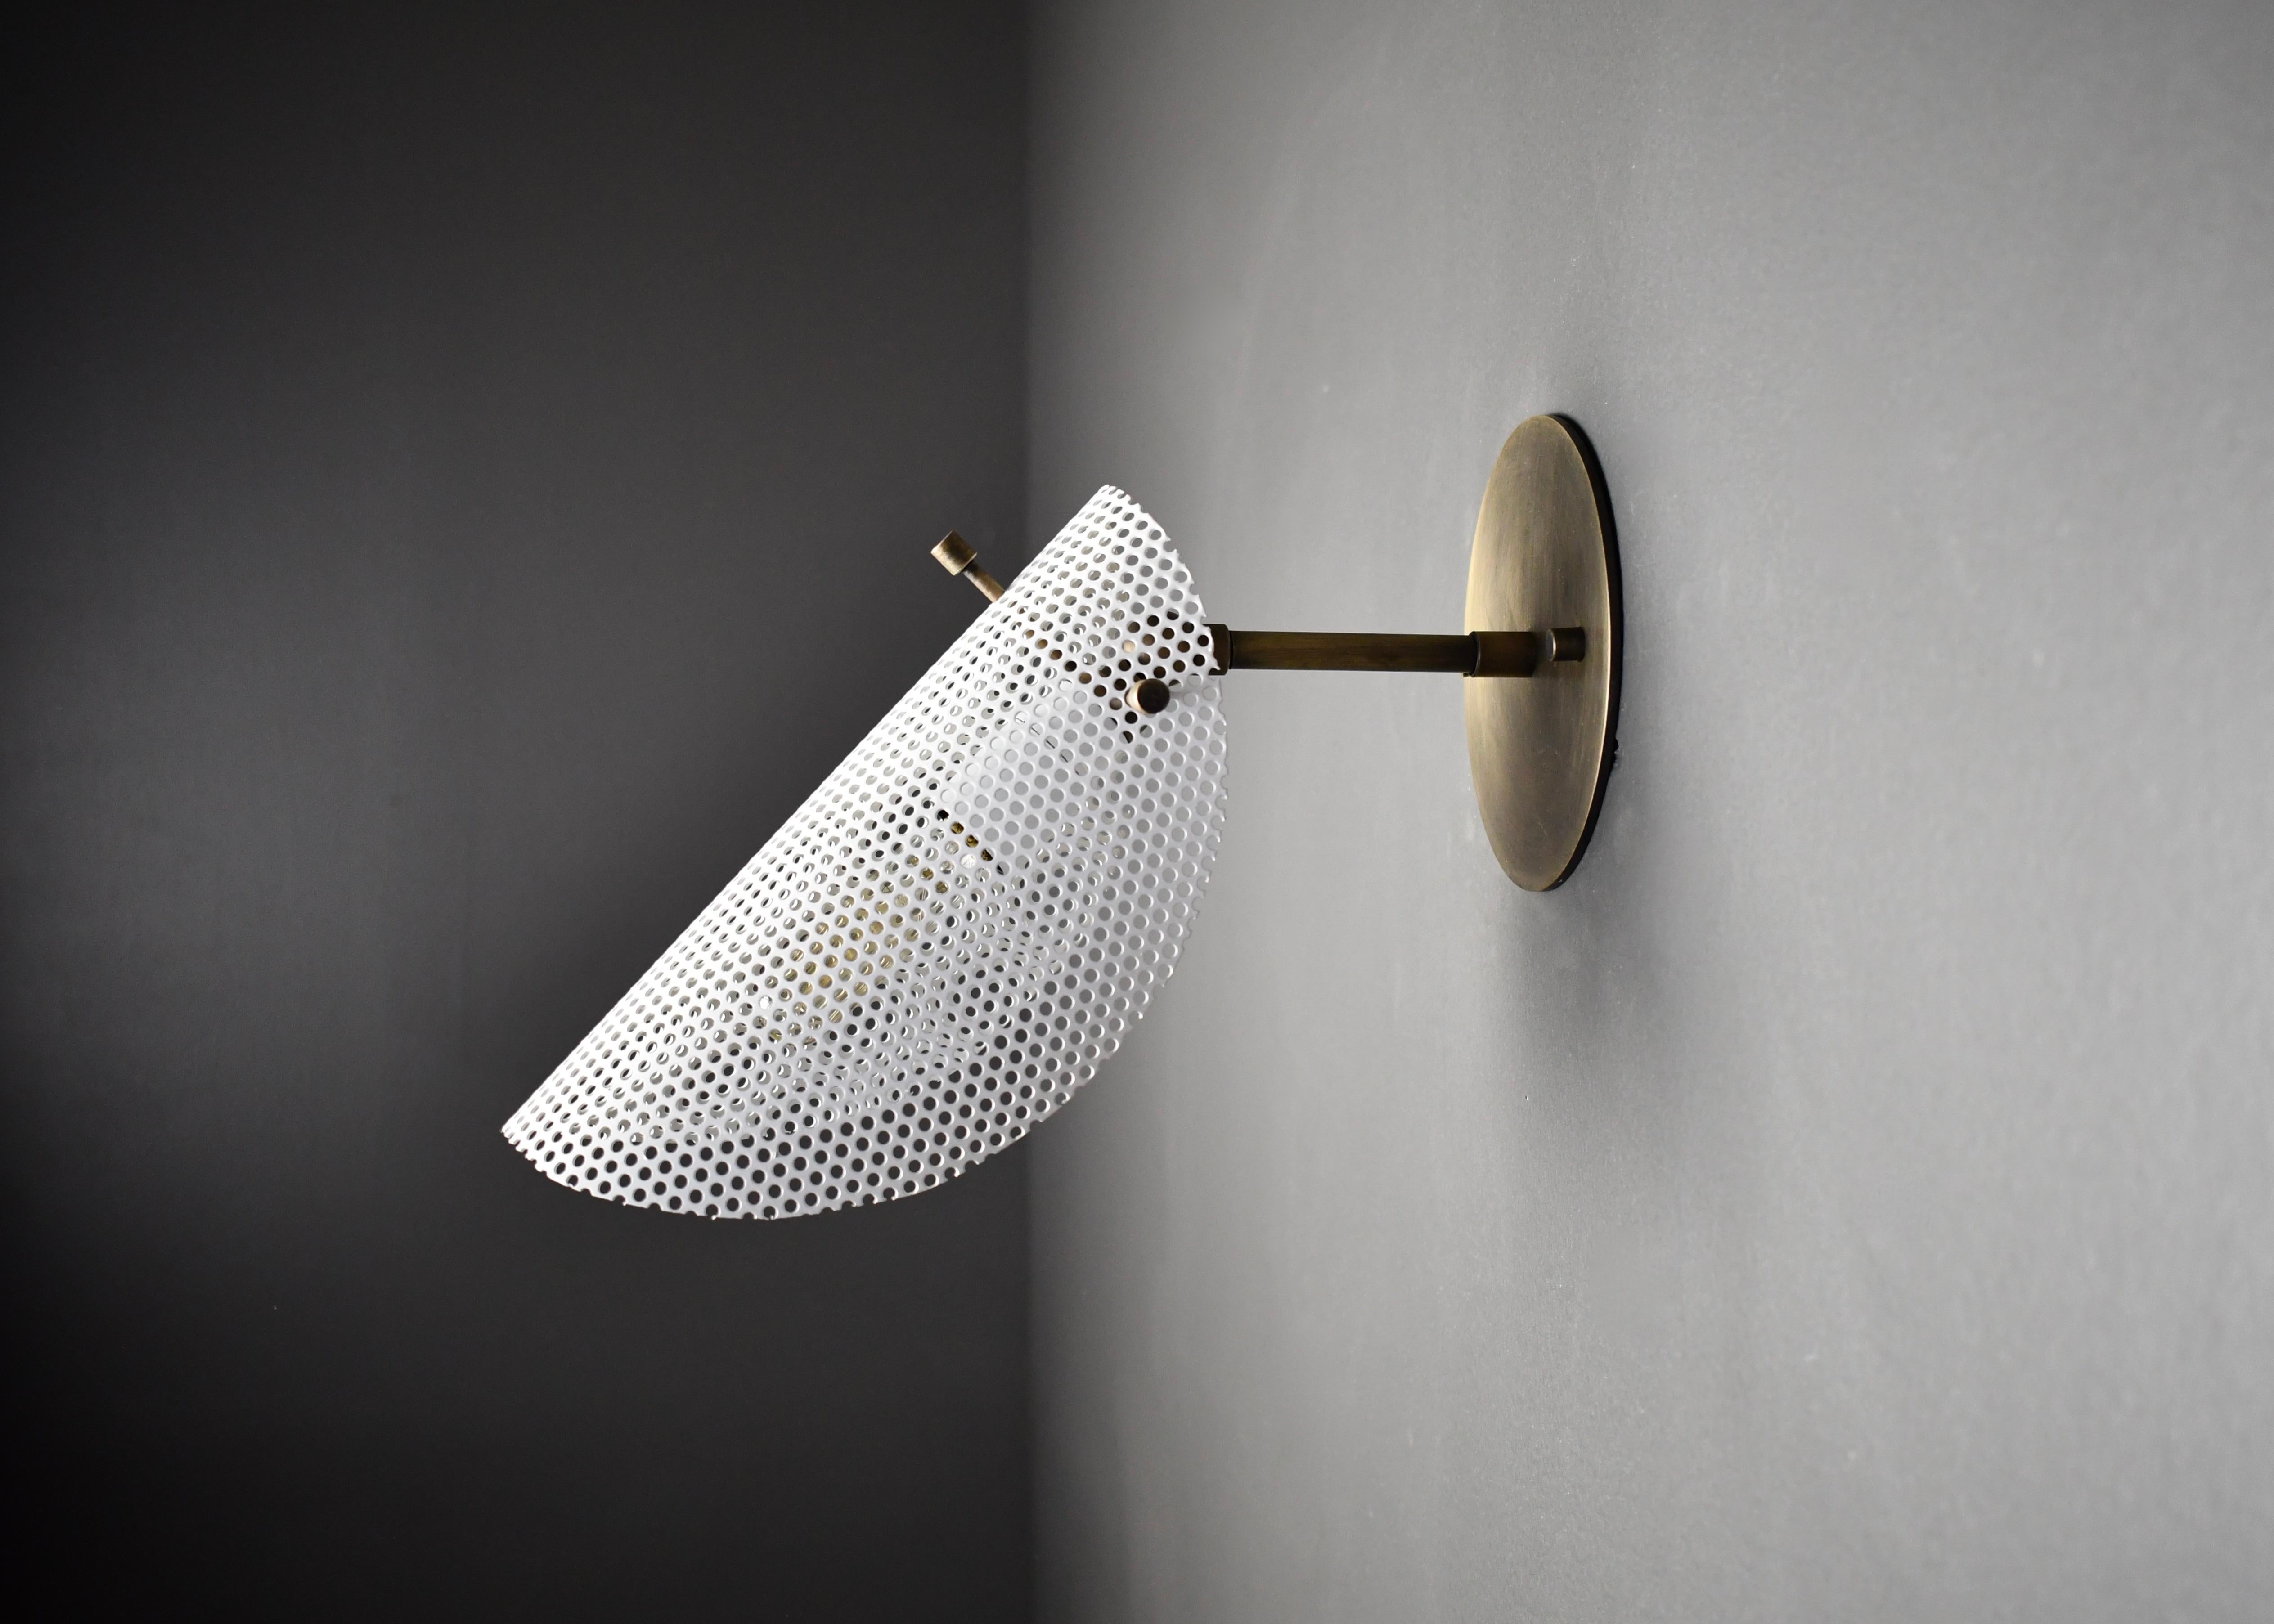 Petite Tulle Wall Sconce in Bronze + White Enamel Mesh, Blueprint Lighting, 2020 In New Condition For Sale In New York, NY